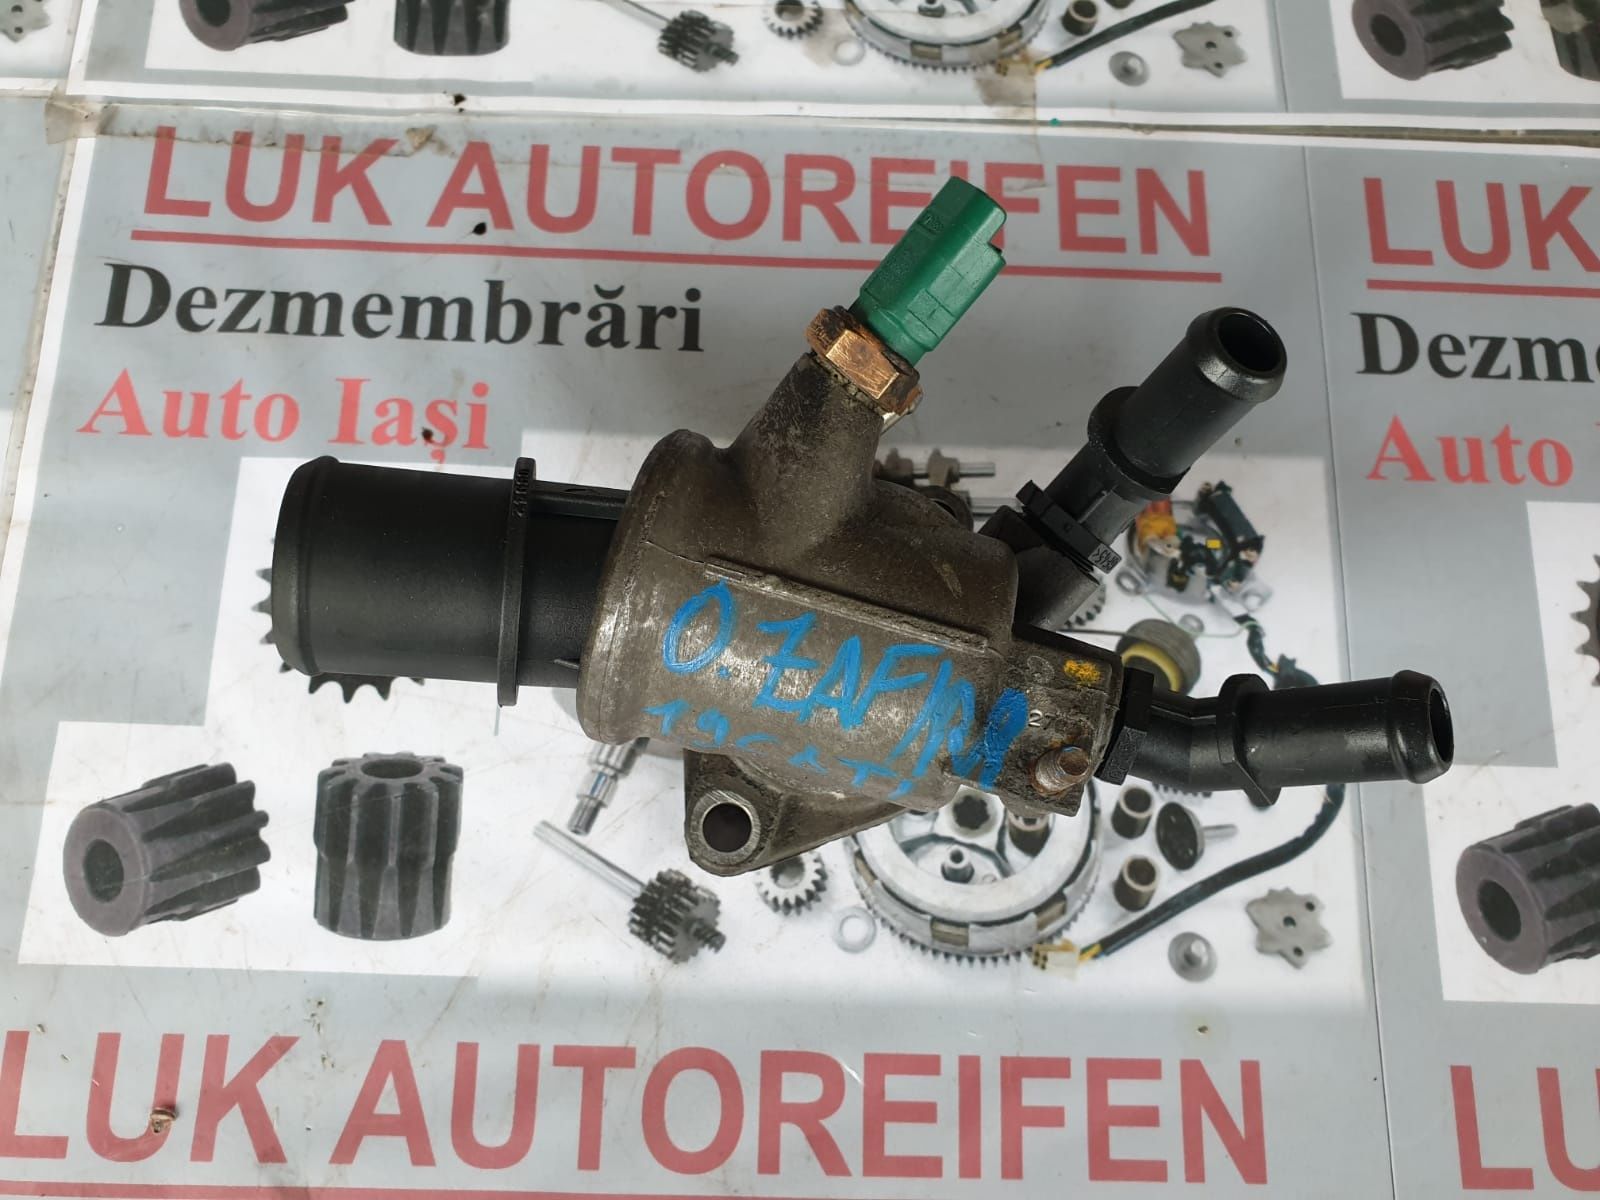 Corp termostat Galerie admisie Opel Vectra C Zafira B Astra H 1.9